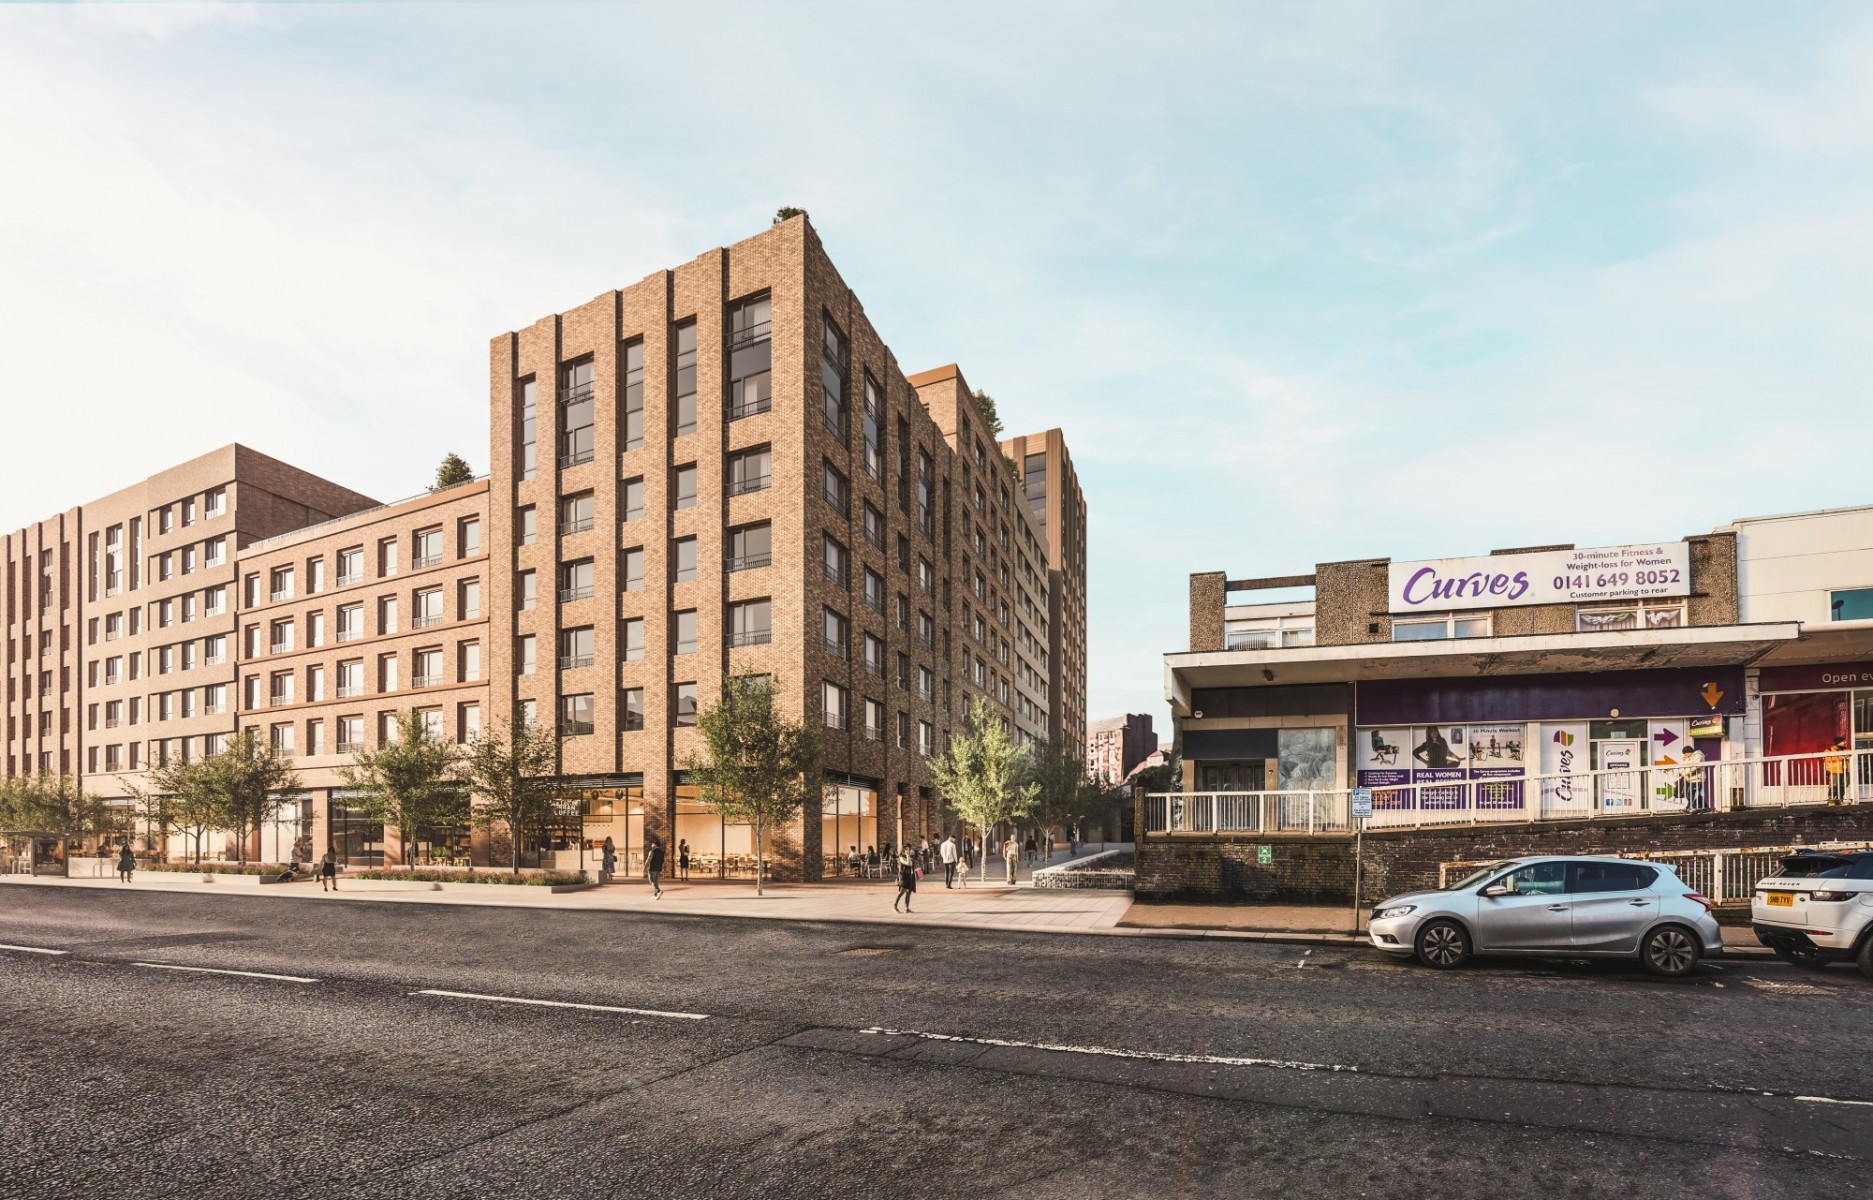 Residents bemoan lack of social housing at Shawlands Arcade redevelopment